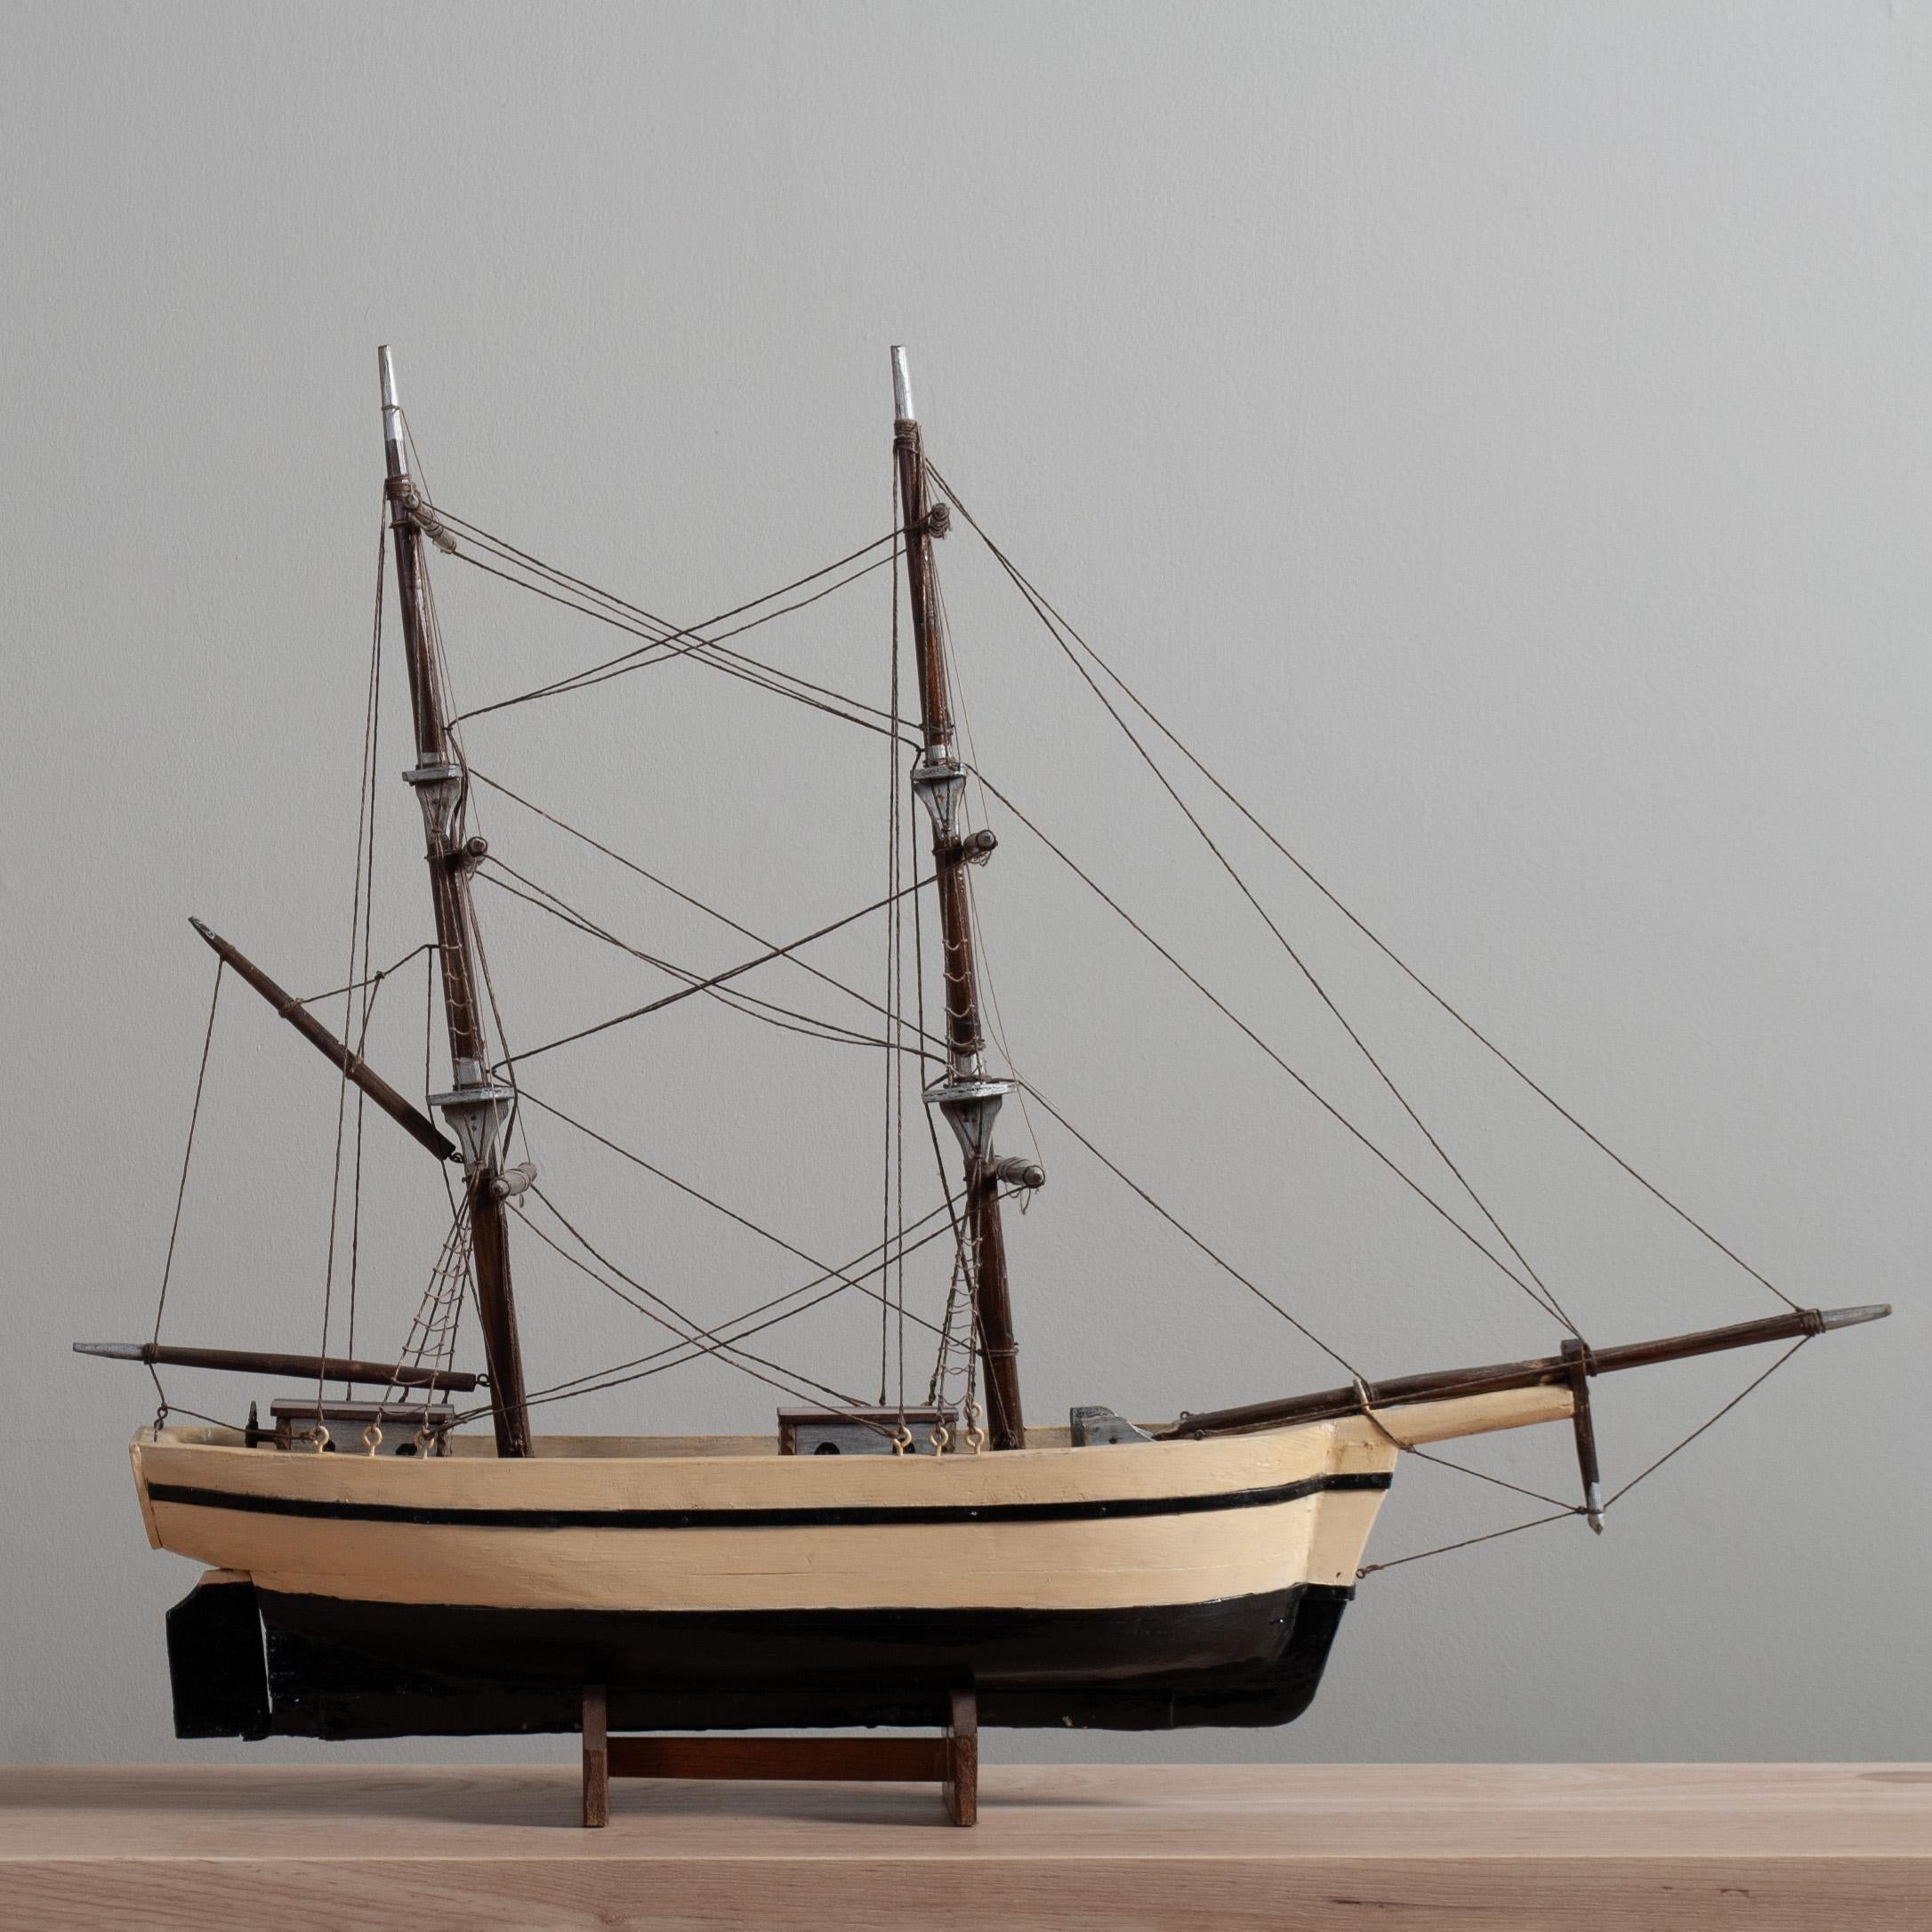 Scandinavian folk art boat of 2 rigged masts - completely scratch built from pine and teak wood. Original paint finish. Handmade and dating from the early 20th century. Some wonderful little attentions to detail whilst utilising general found items.